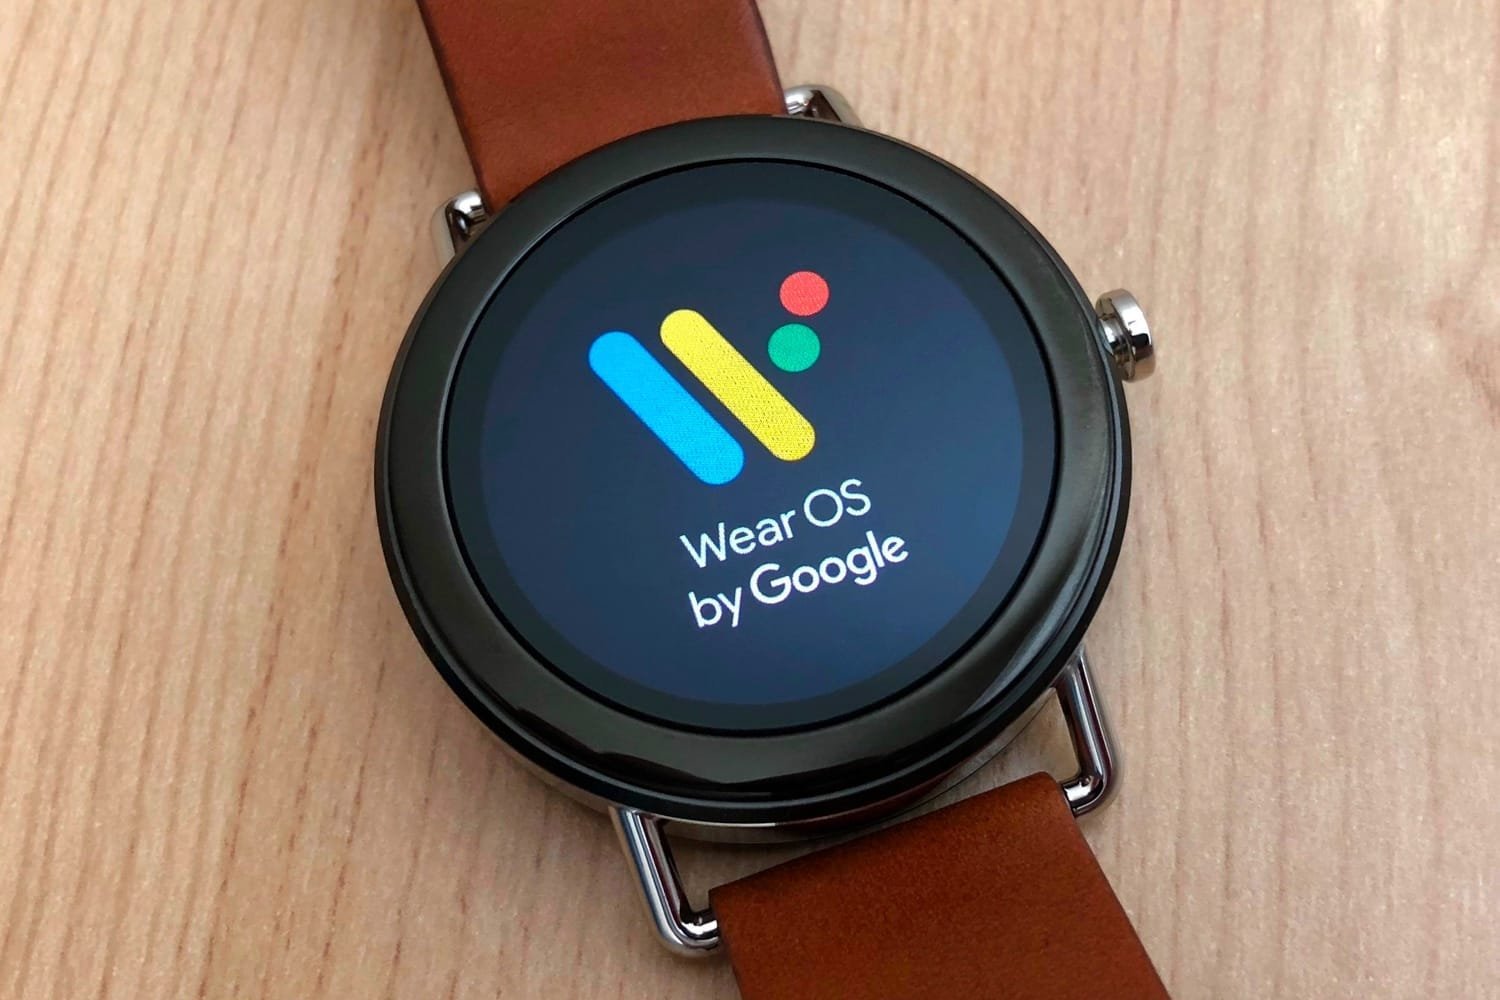 Google will redesign key elements in Wear OS